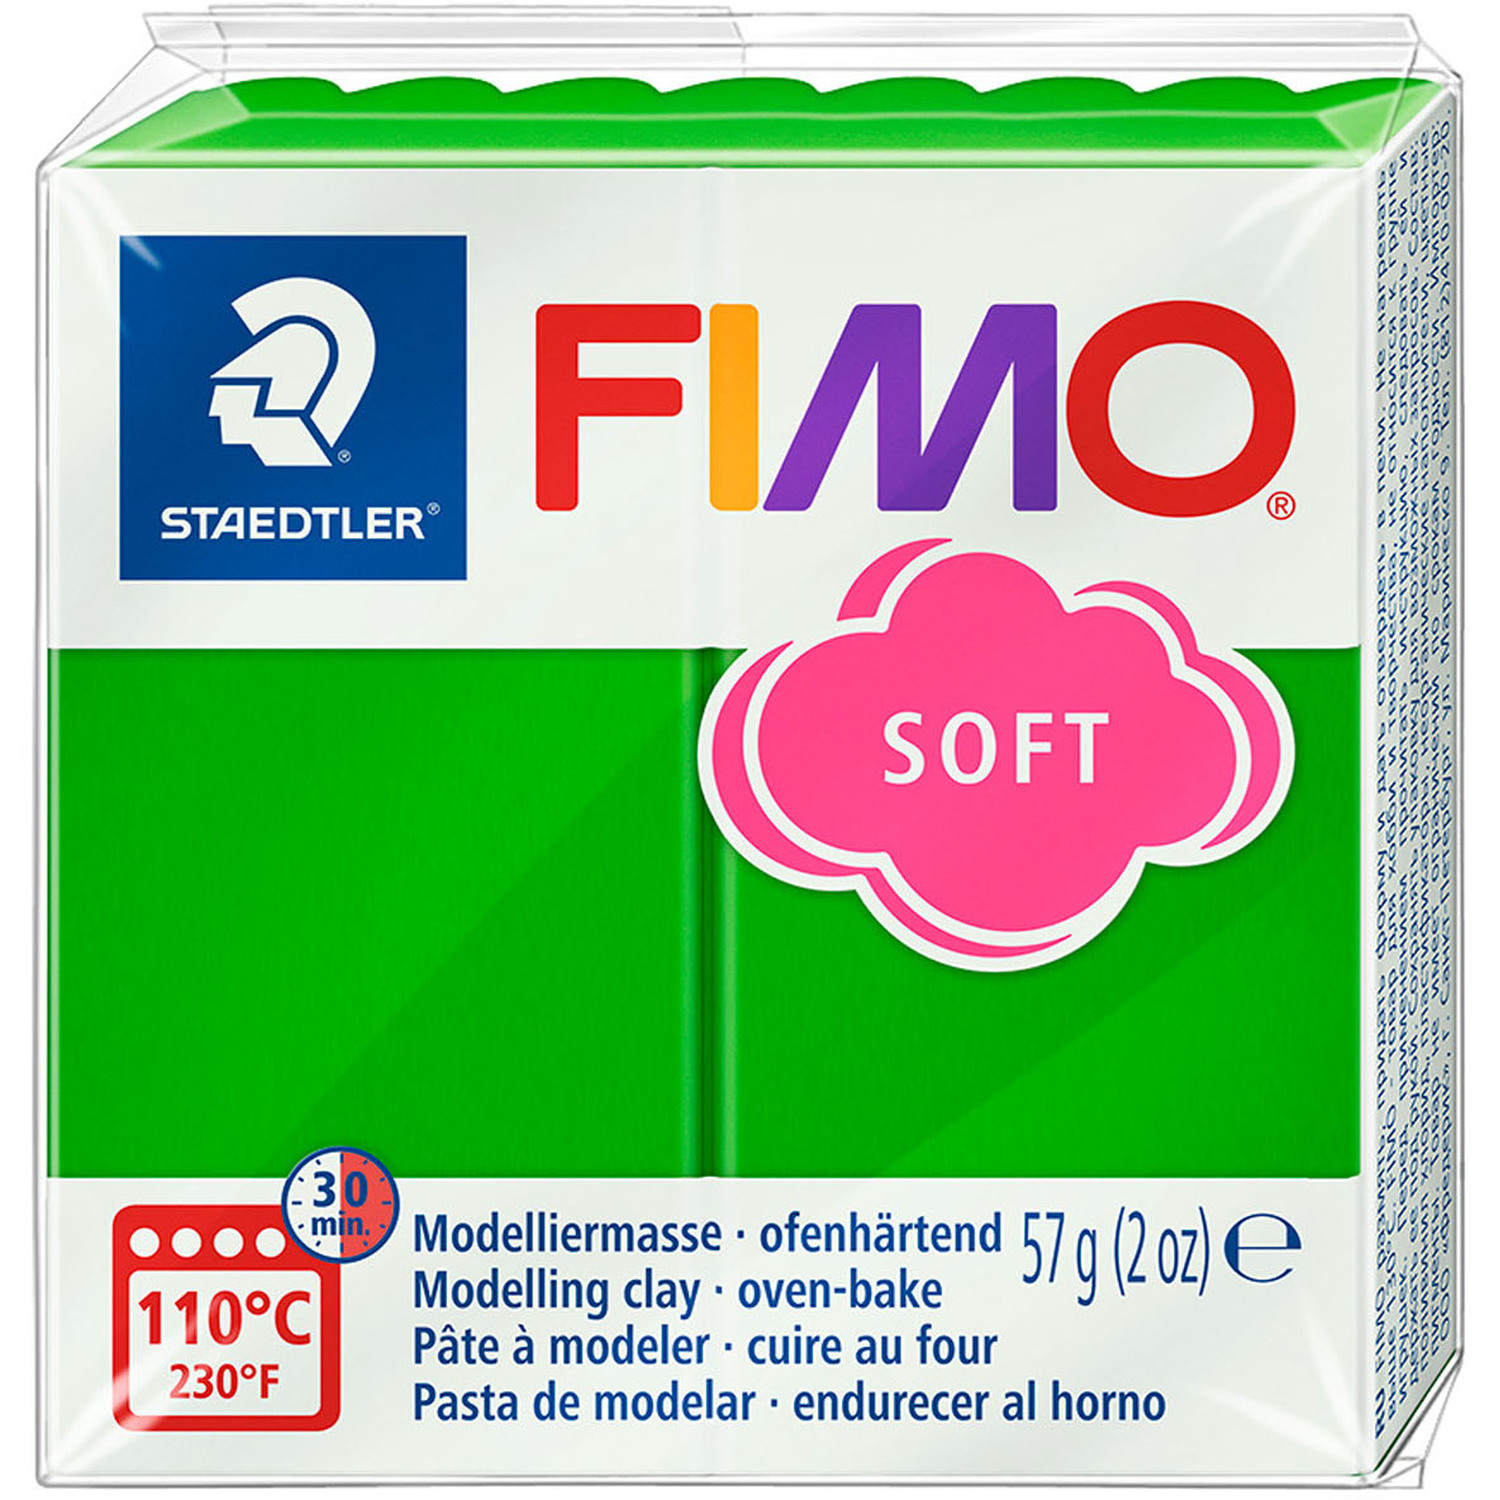 Staedtler FIMO Soft Modelling Clay Block - Apple Green Image 3